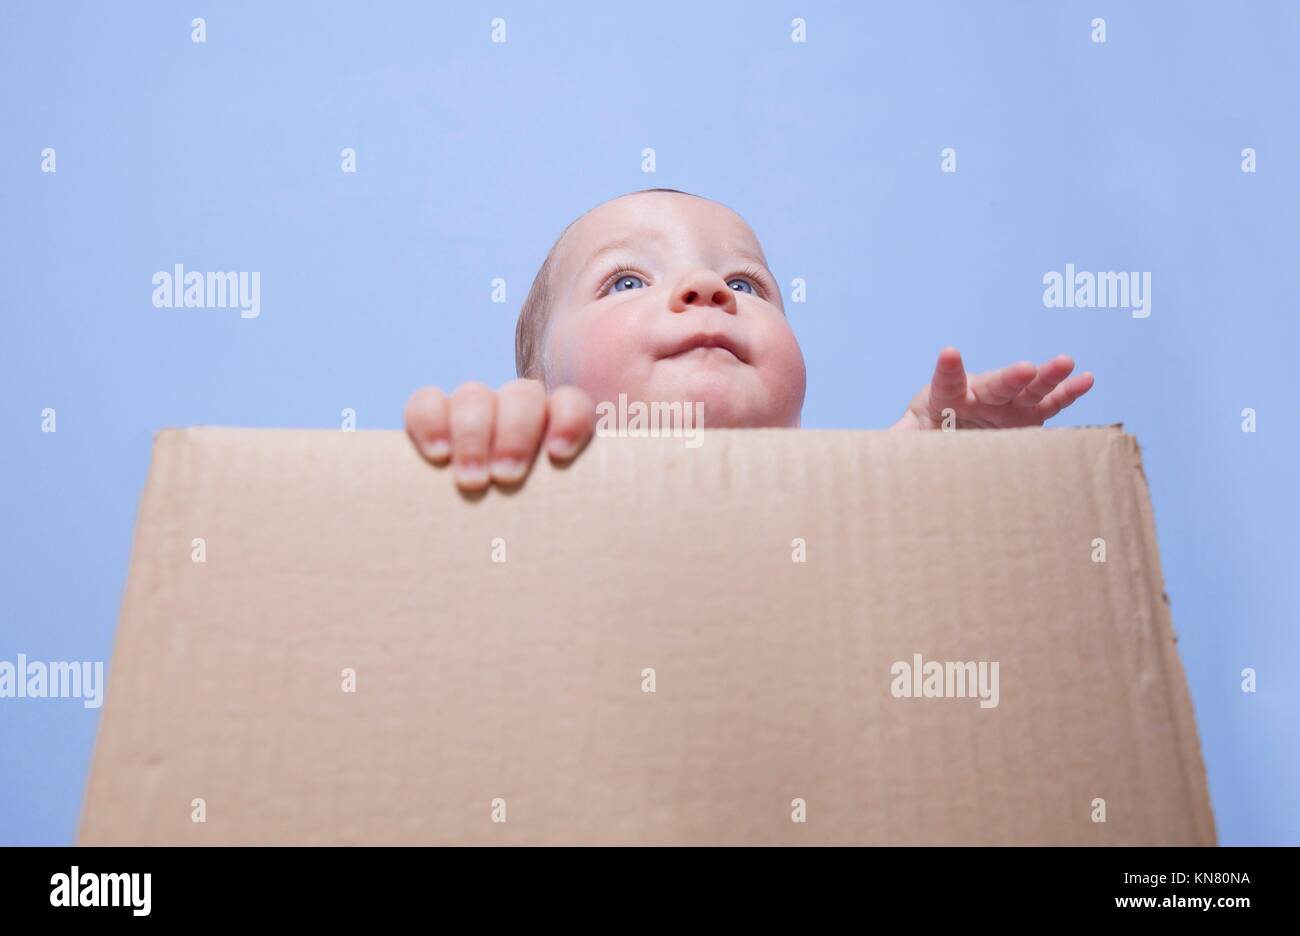 Portrait of a cute baby playing in a brown cardboard box. Stock Photo